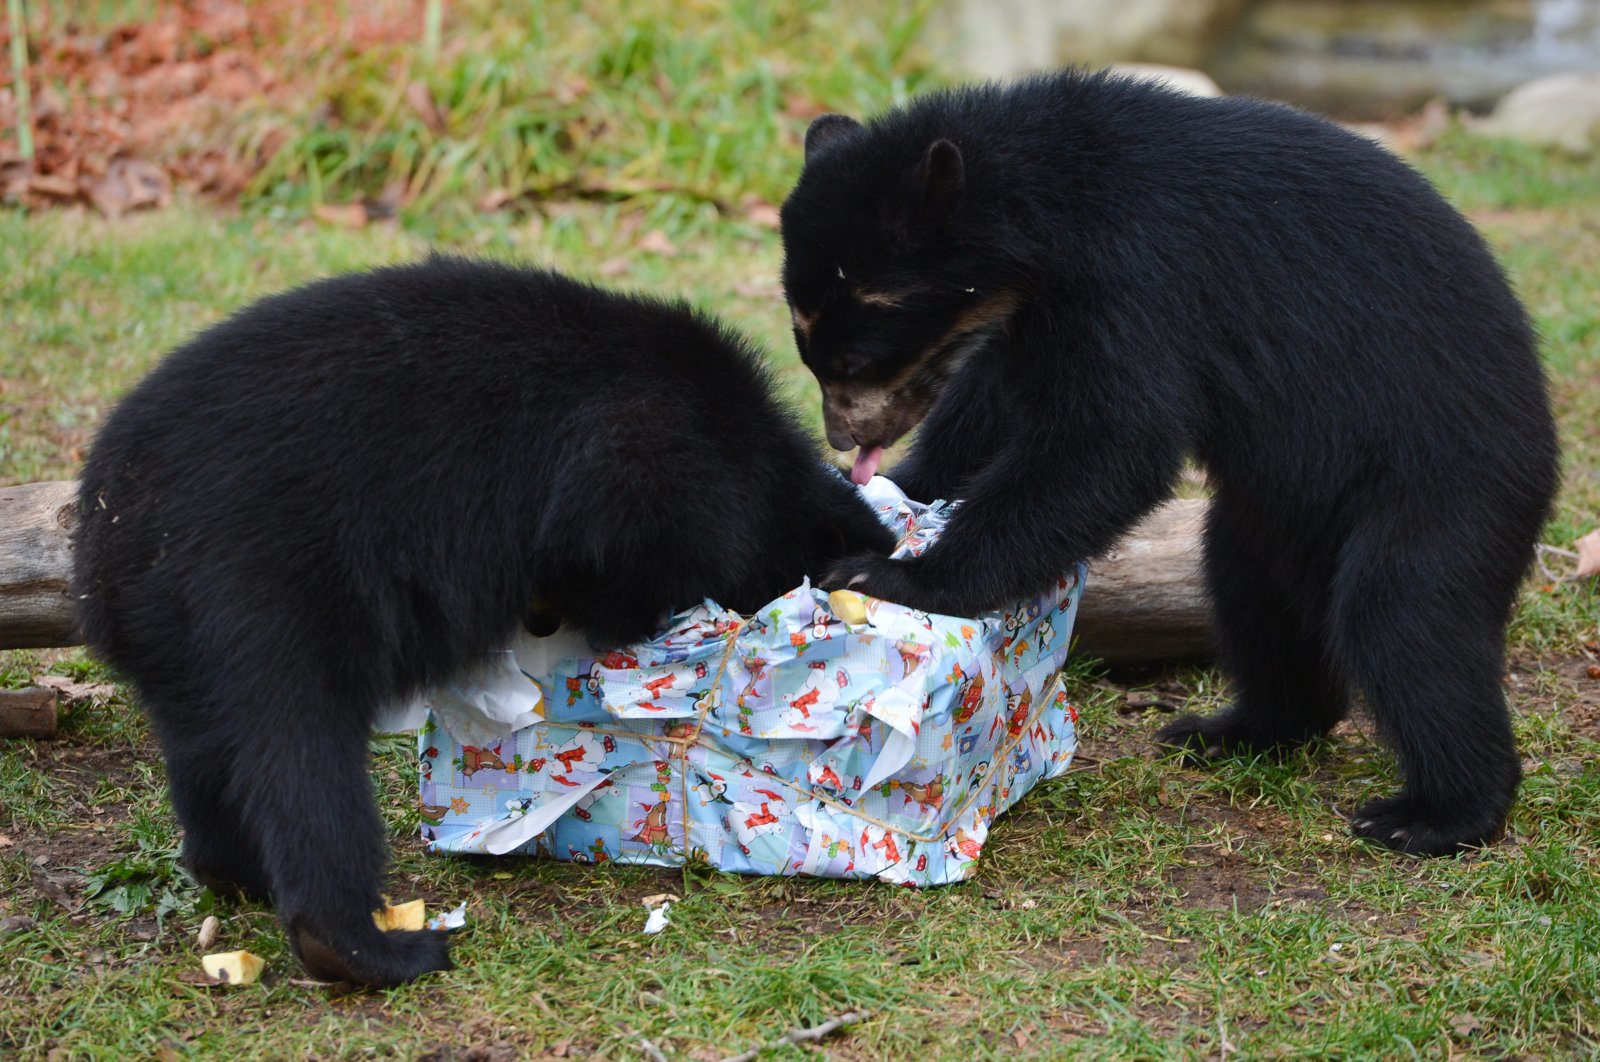 Andean bear twins Tupa und Sonco  open their Christmas gift box with fruit and vegetables in their enclosure in the zoo in Frankfurt, Germany Thursday Dec. 25, 2014.  (AP Photo)